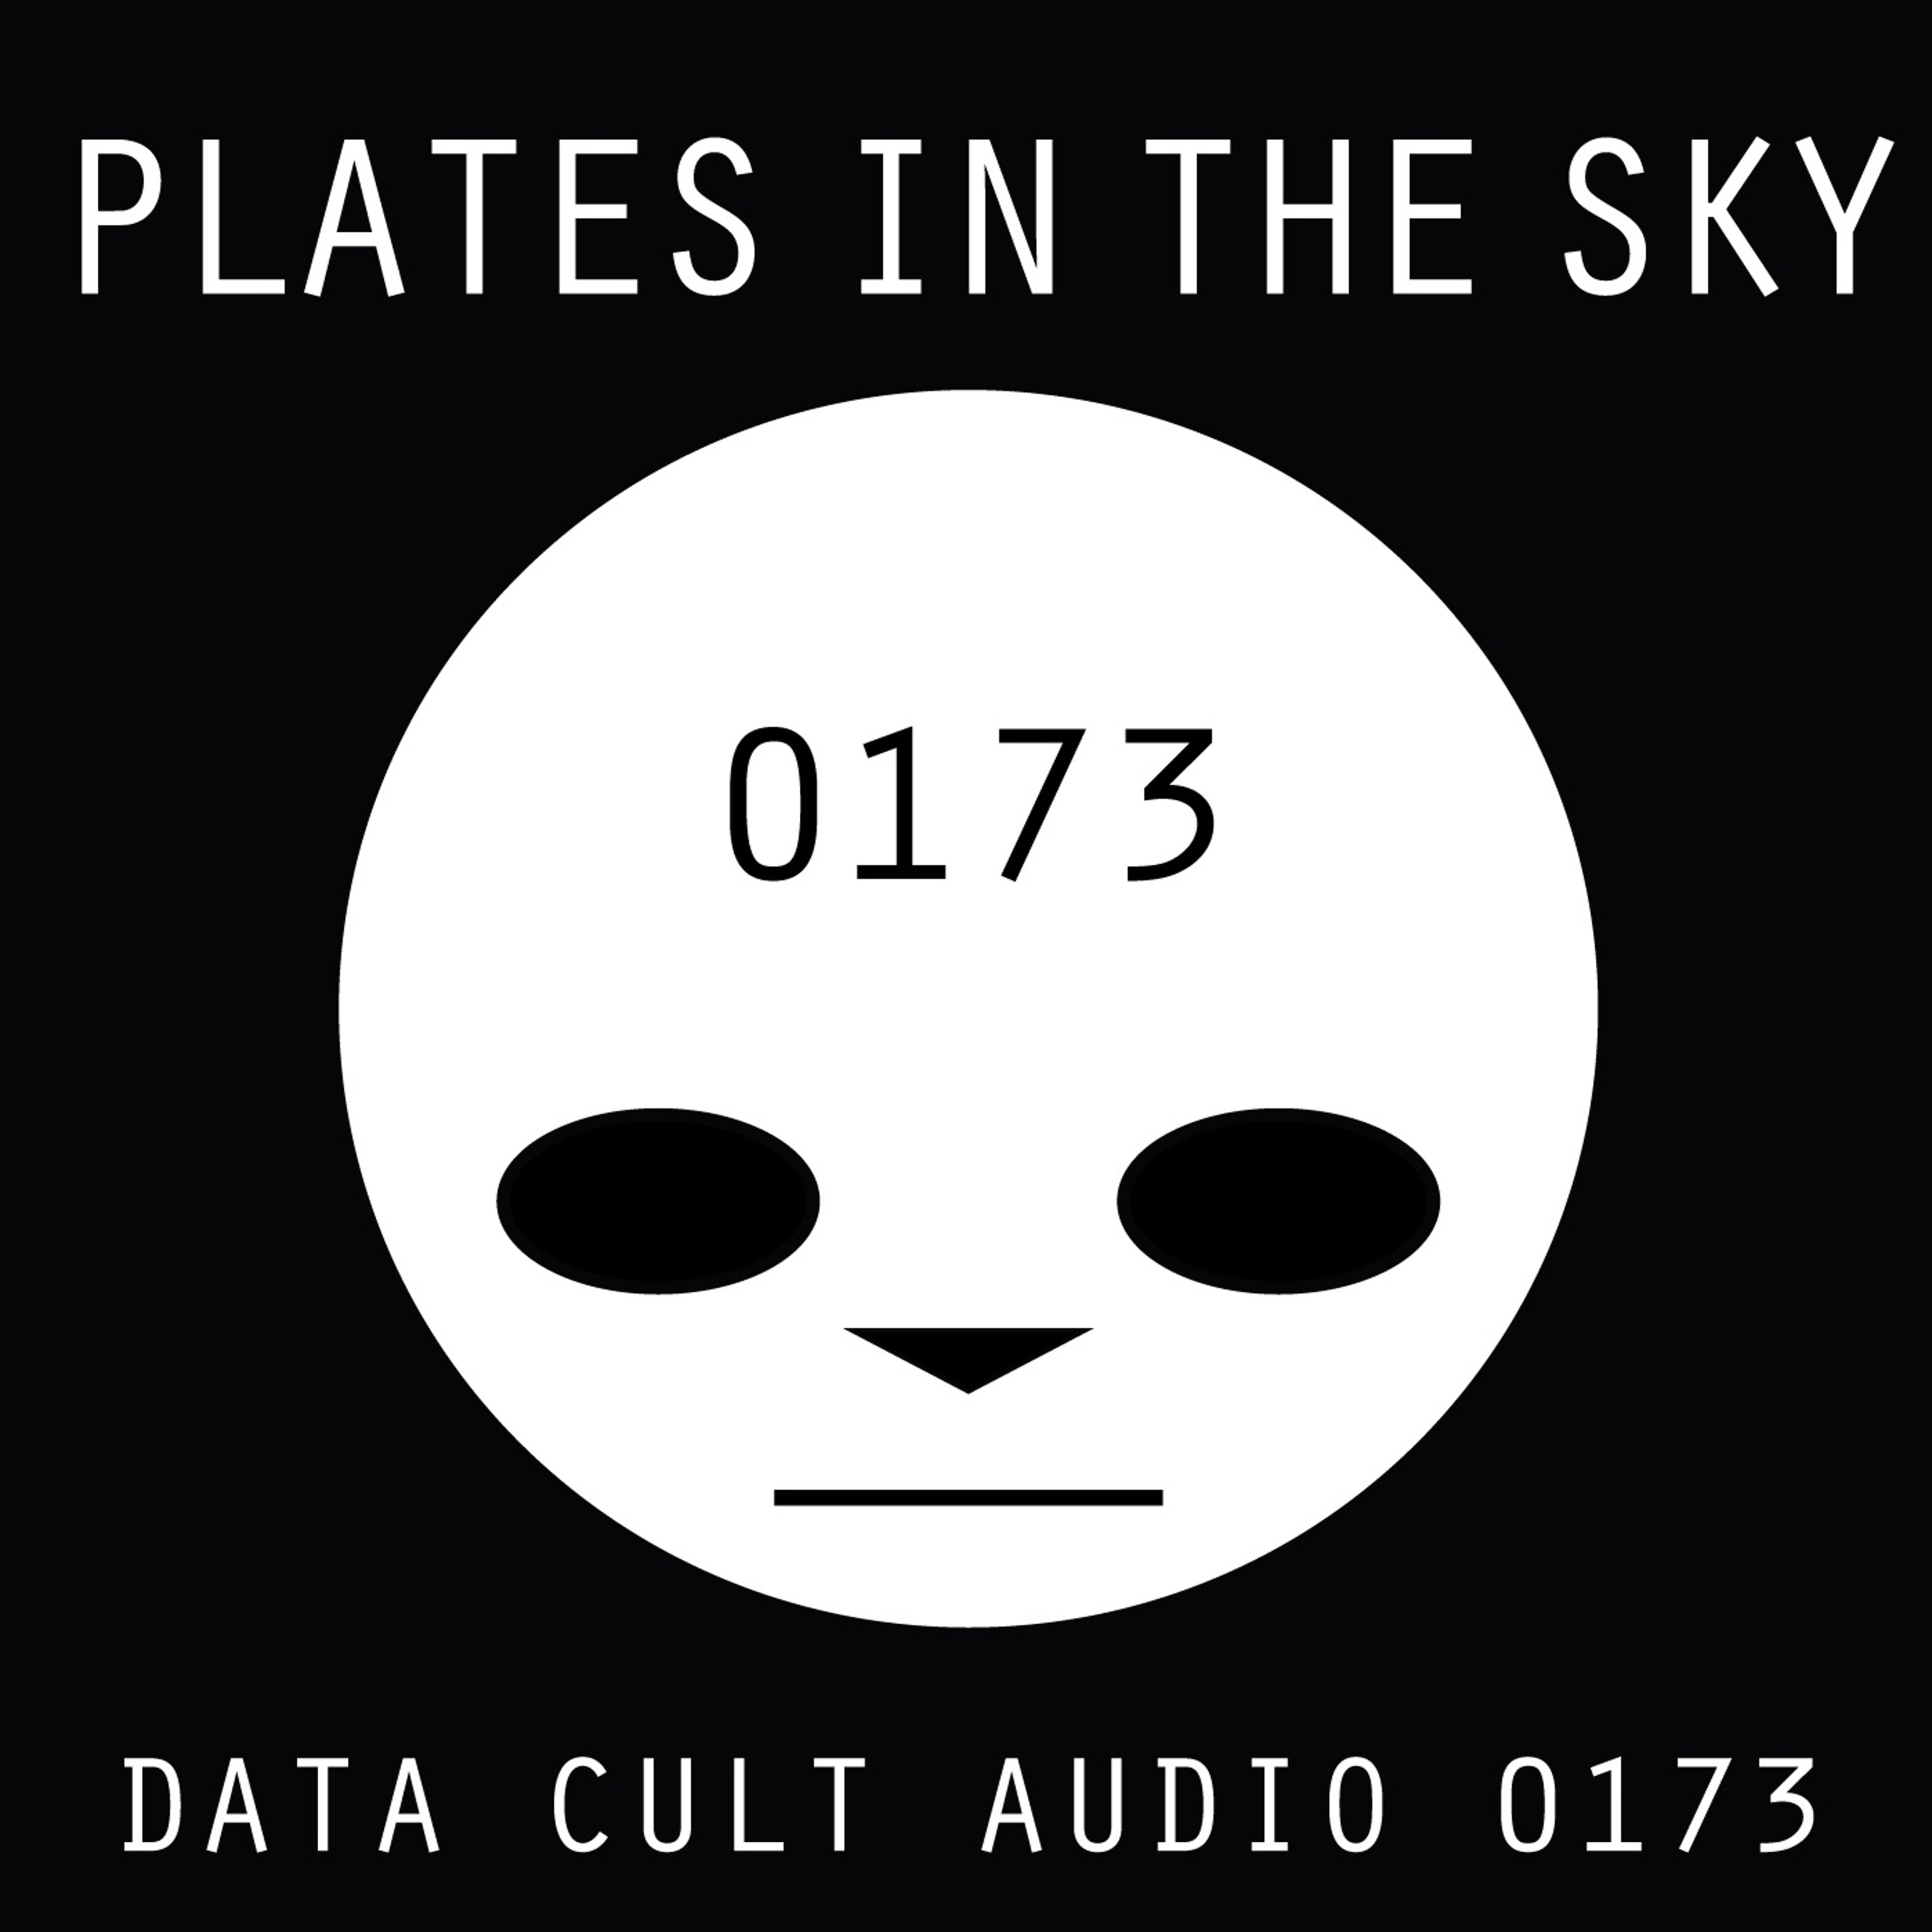 Data Cult Audio 0173 - Plates In The Sky